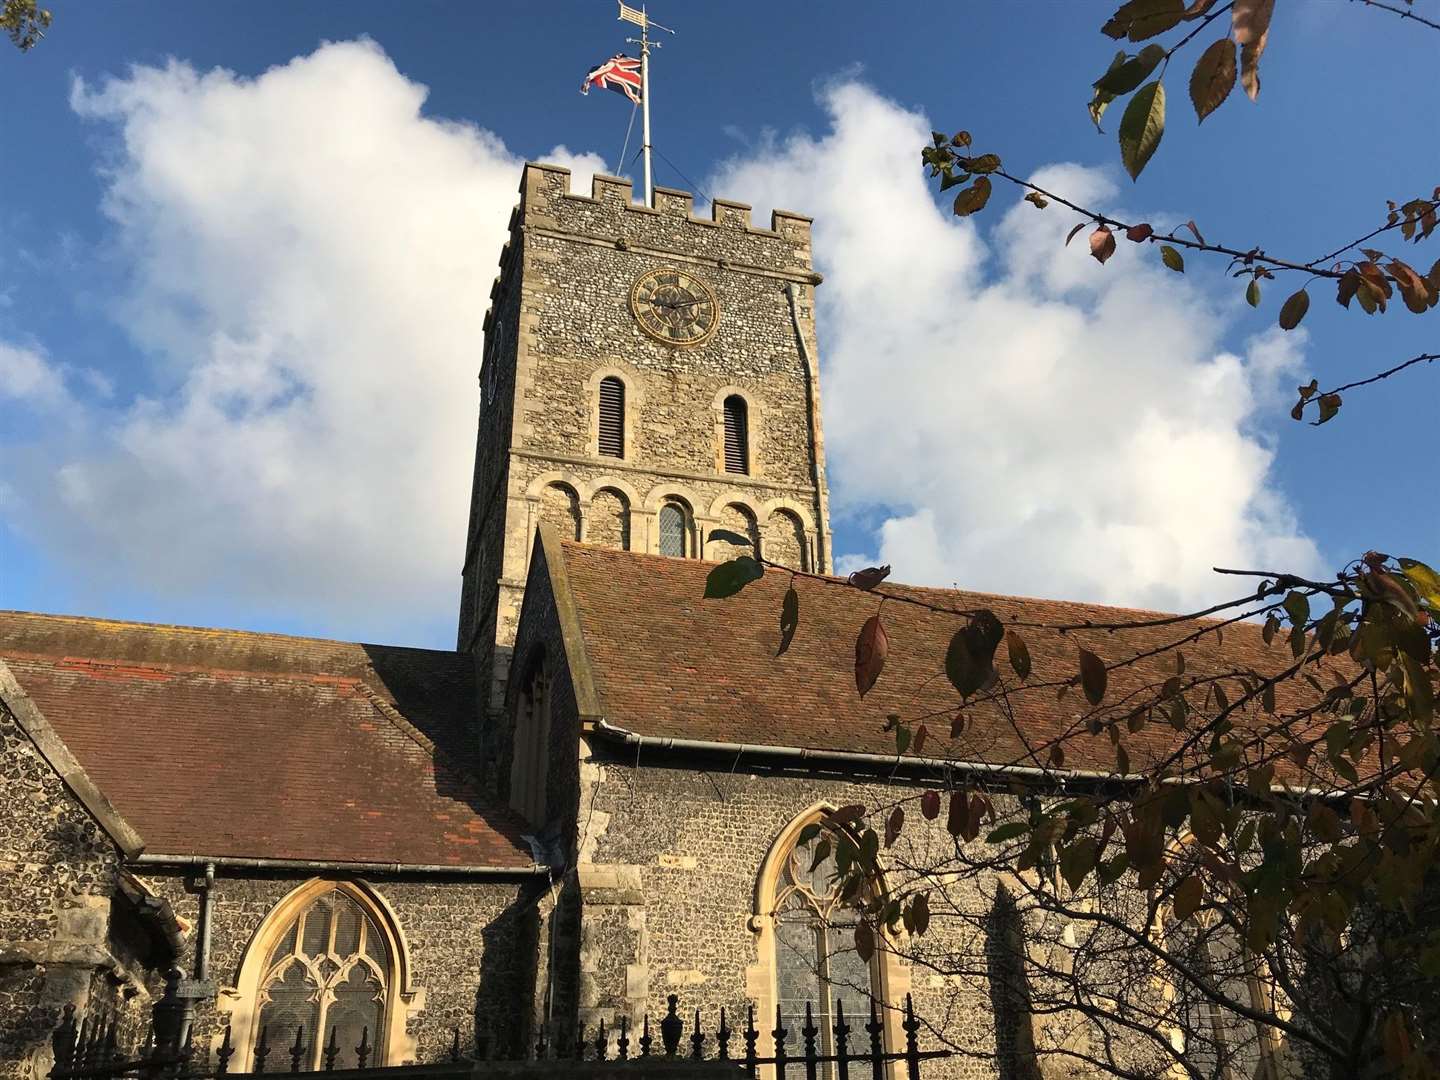 St Laurence Church in Ramsgate (21621957)